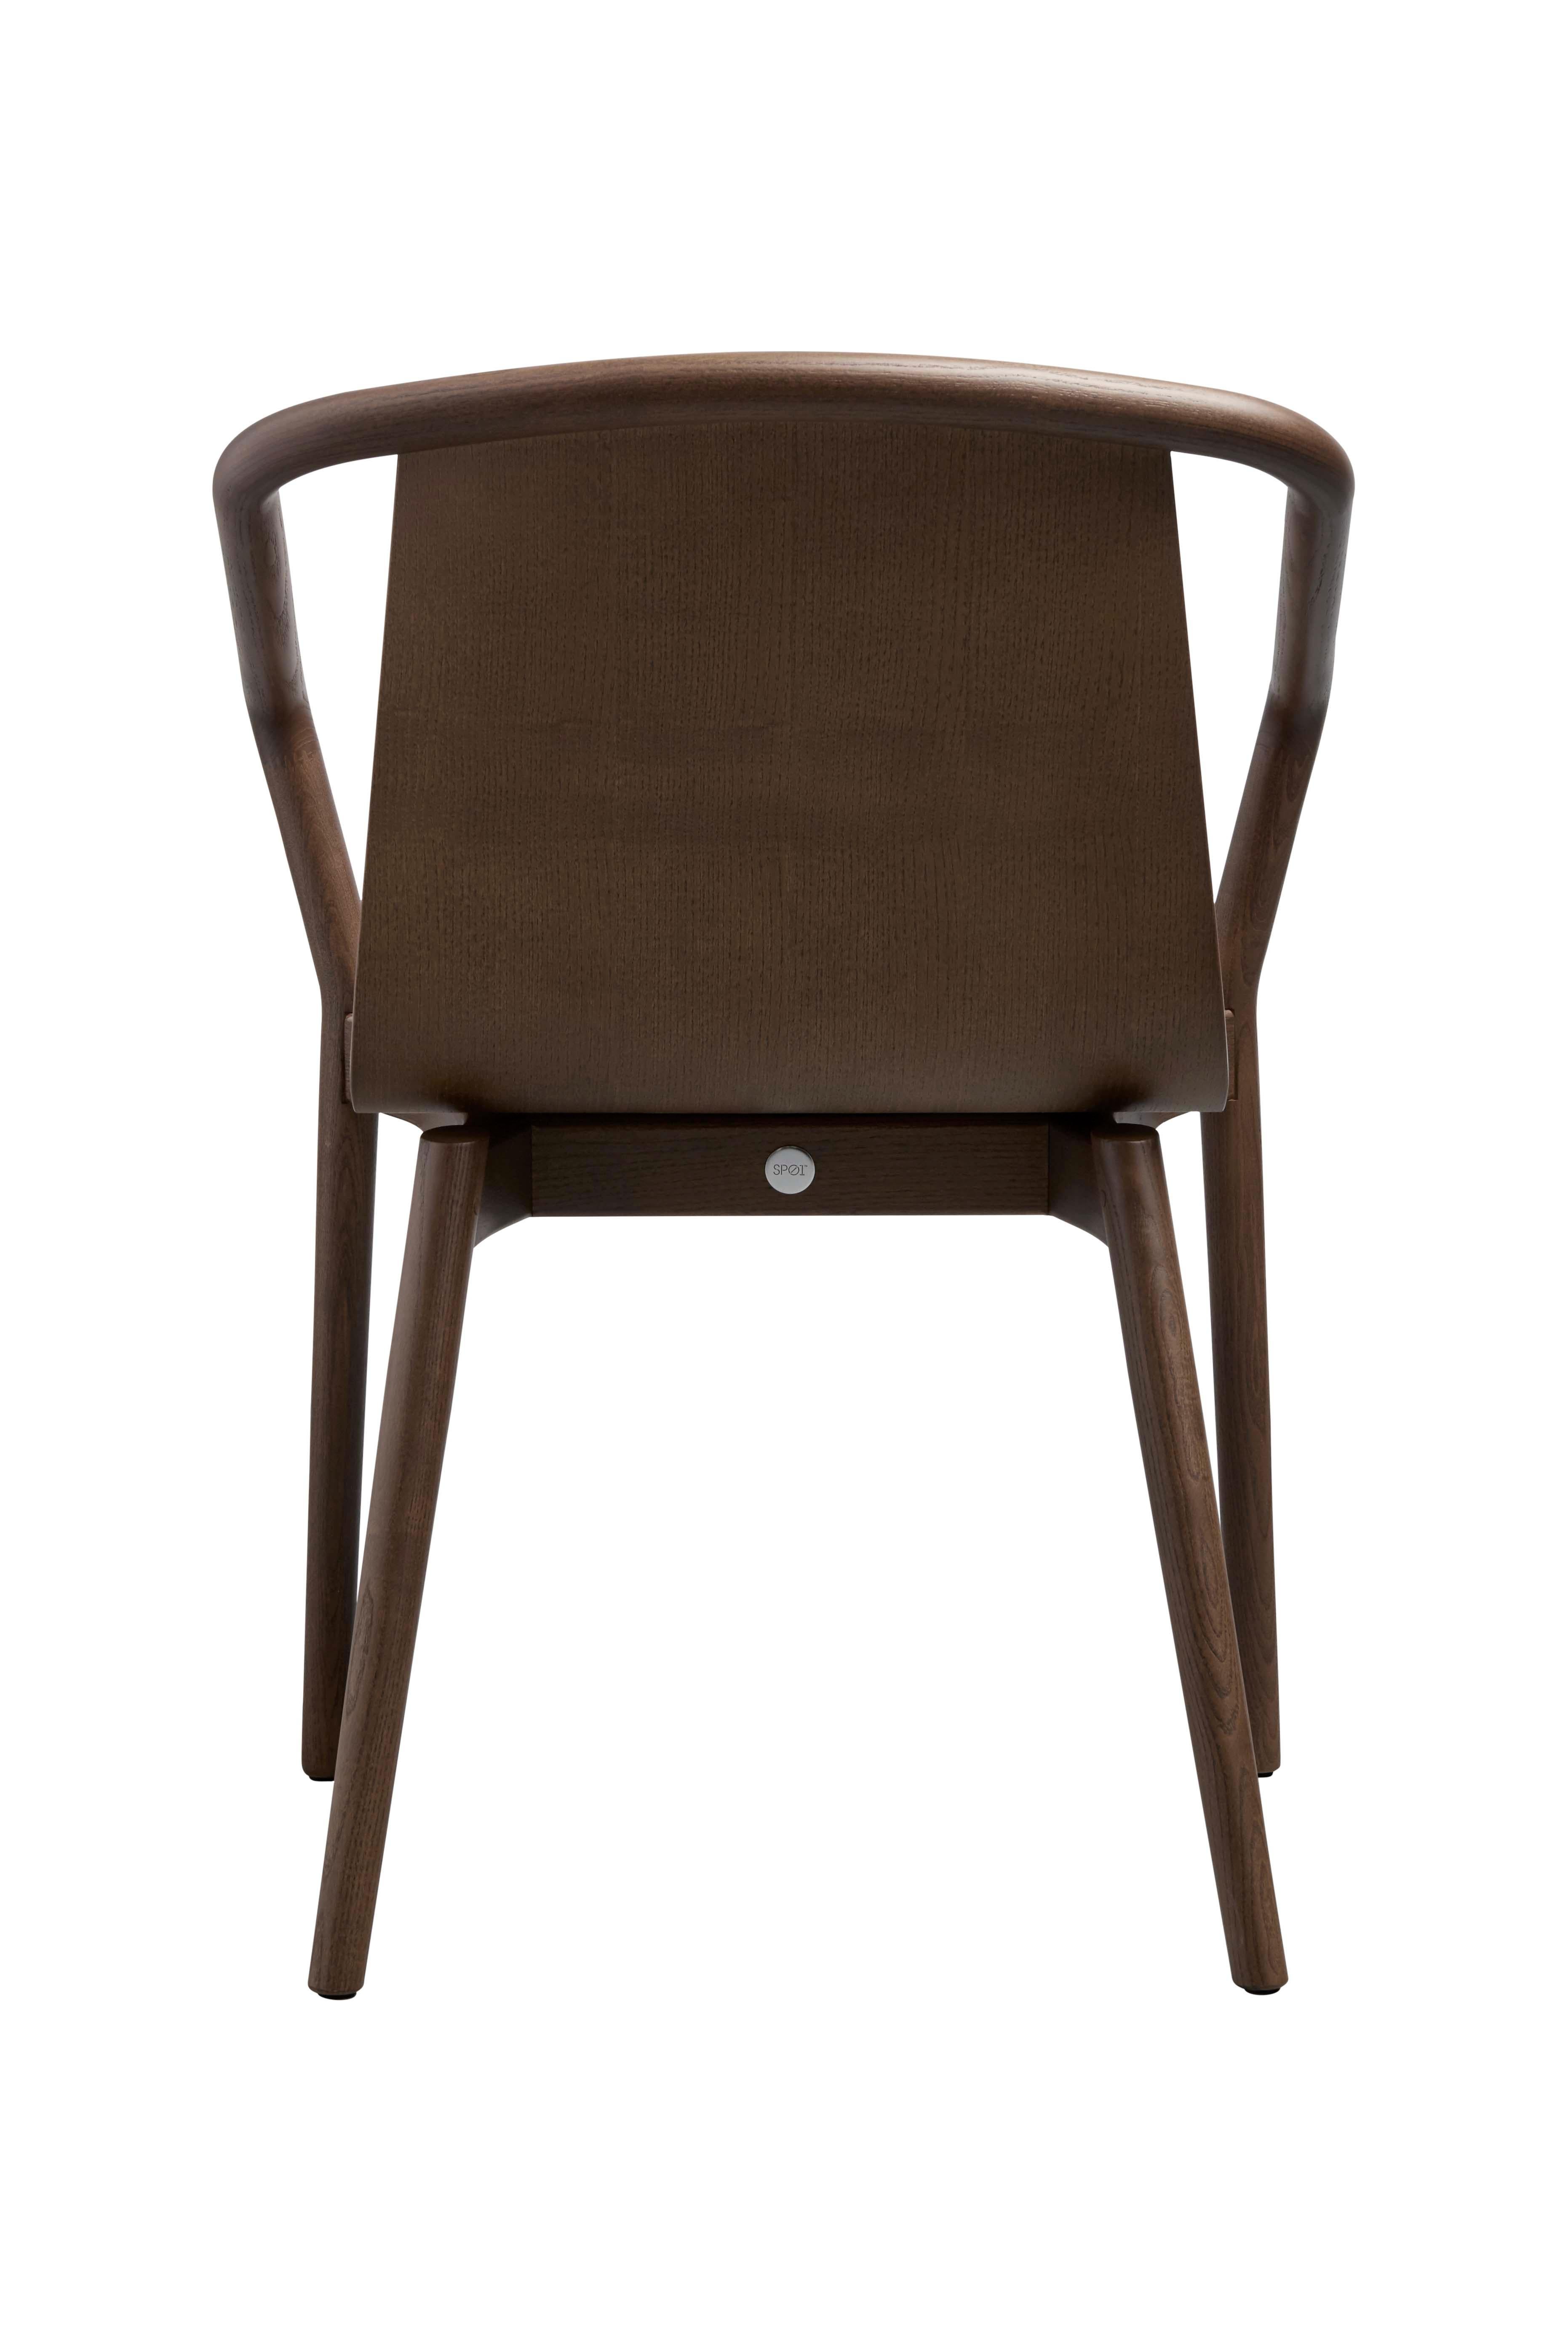 Italian SP01 Thomas Chair in Walnut Stained Ash, Made in Italy For Sale